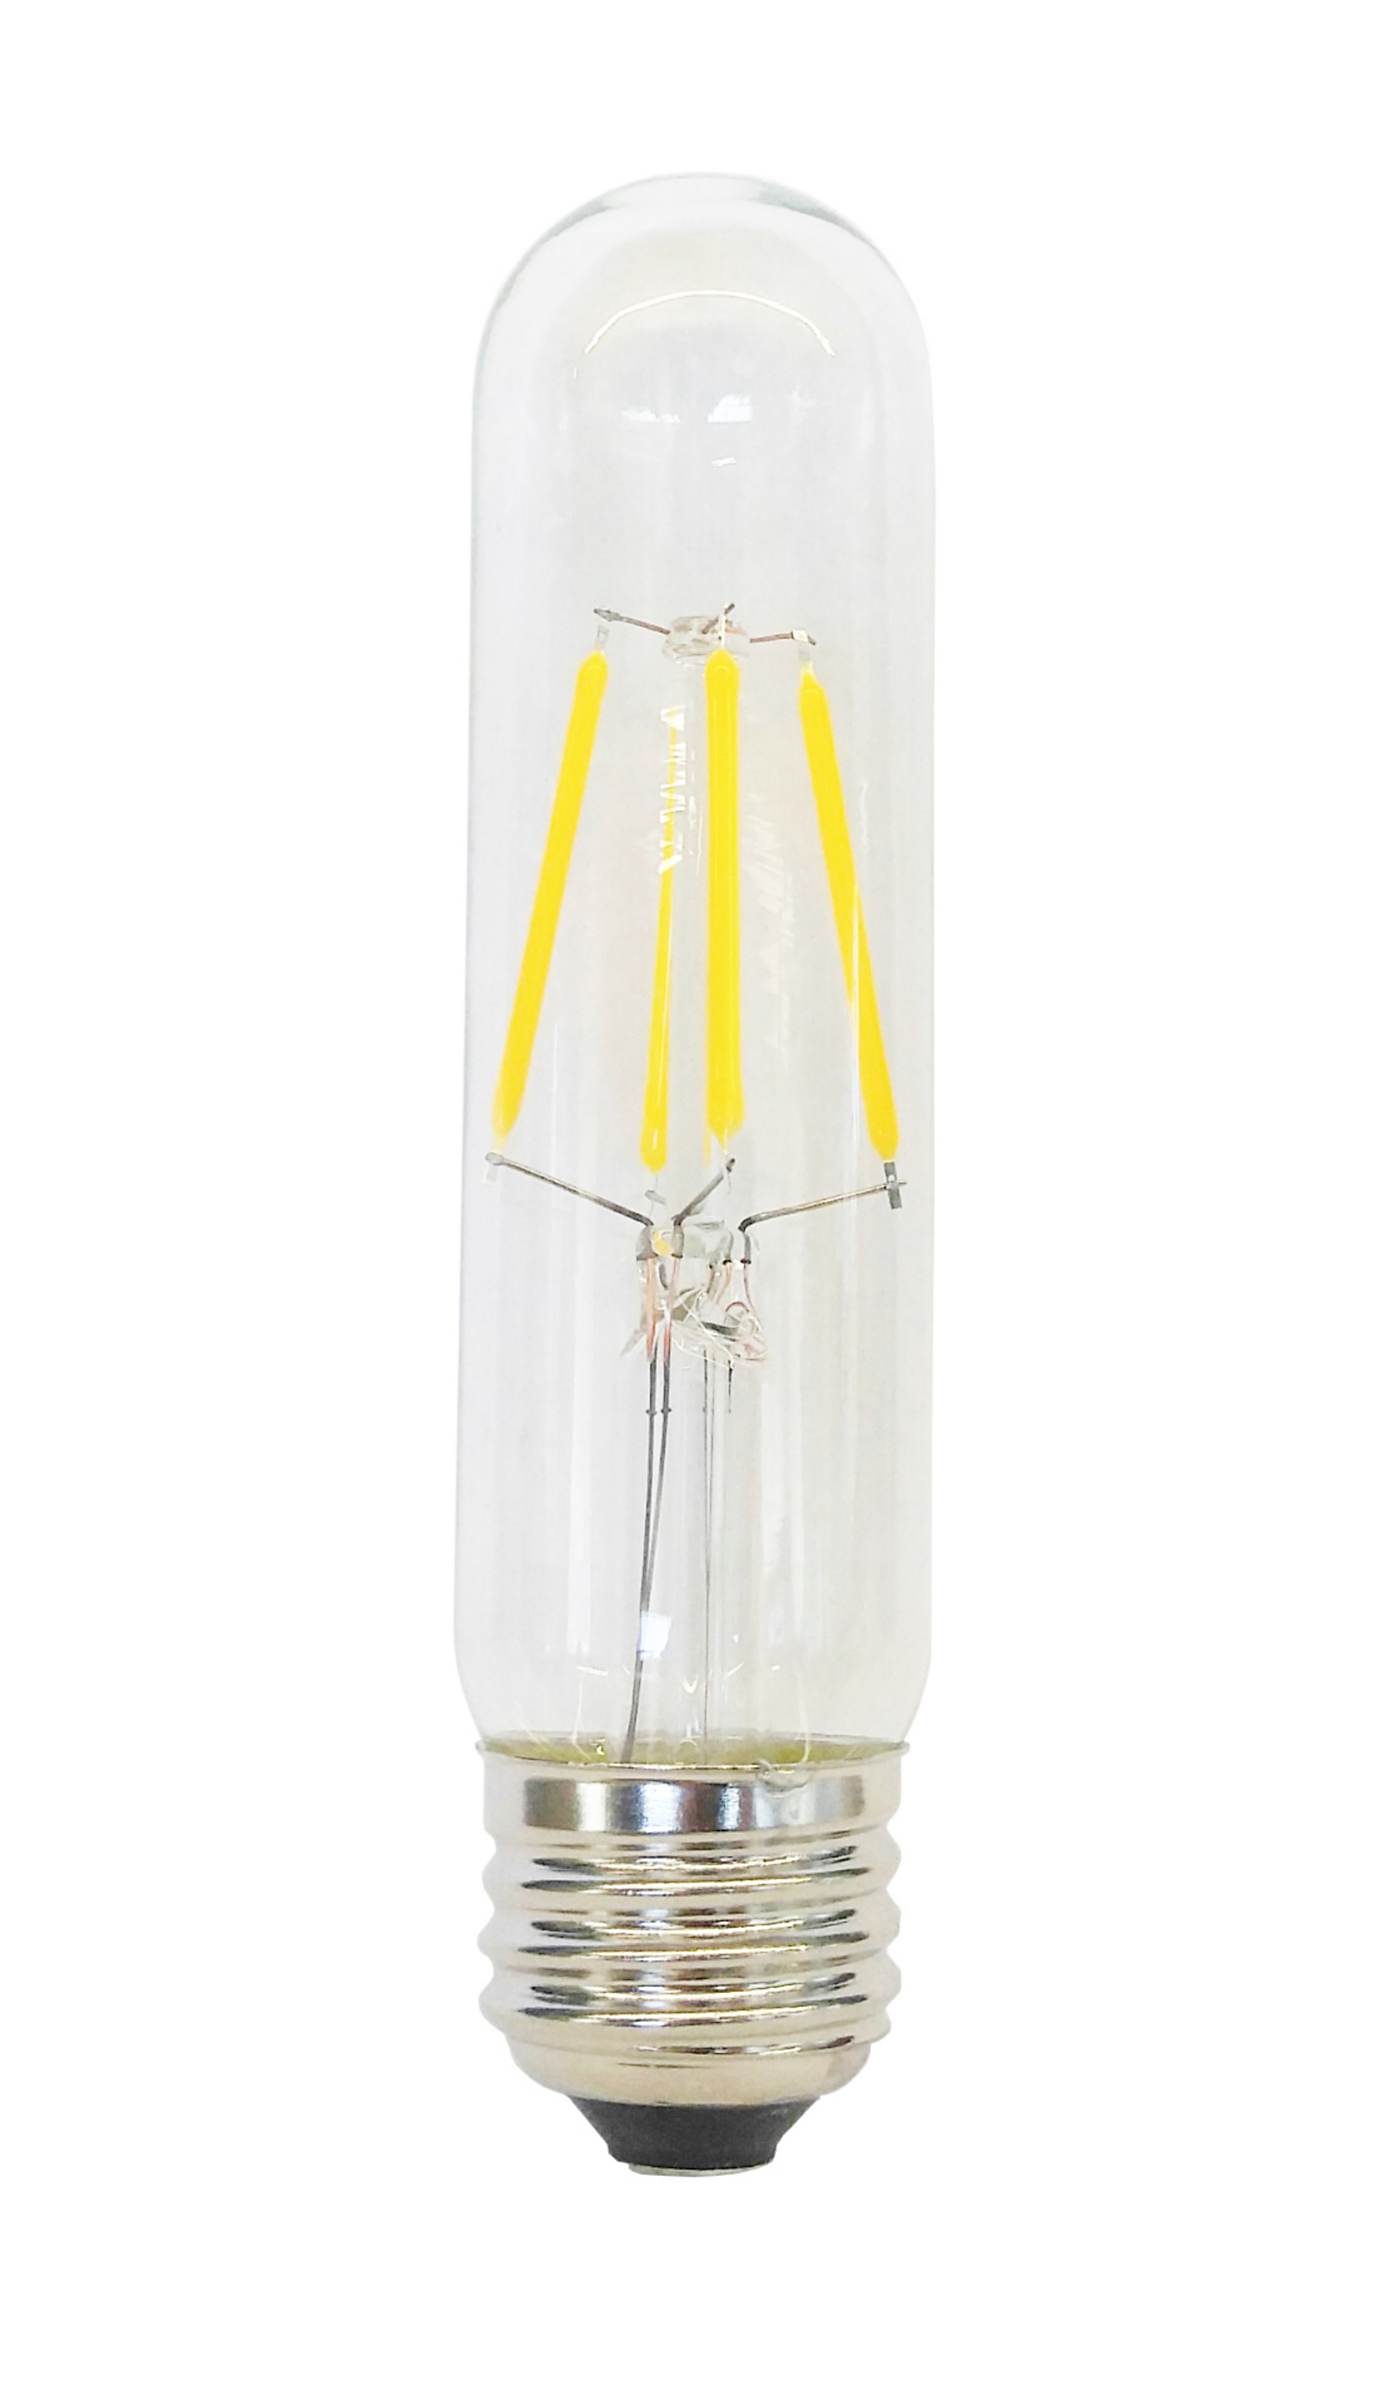 LED T10 Dimmable Filament Light Bulb, 40w Comparable